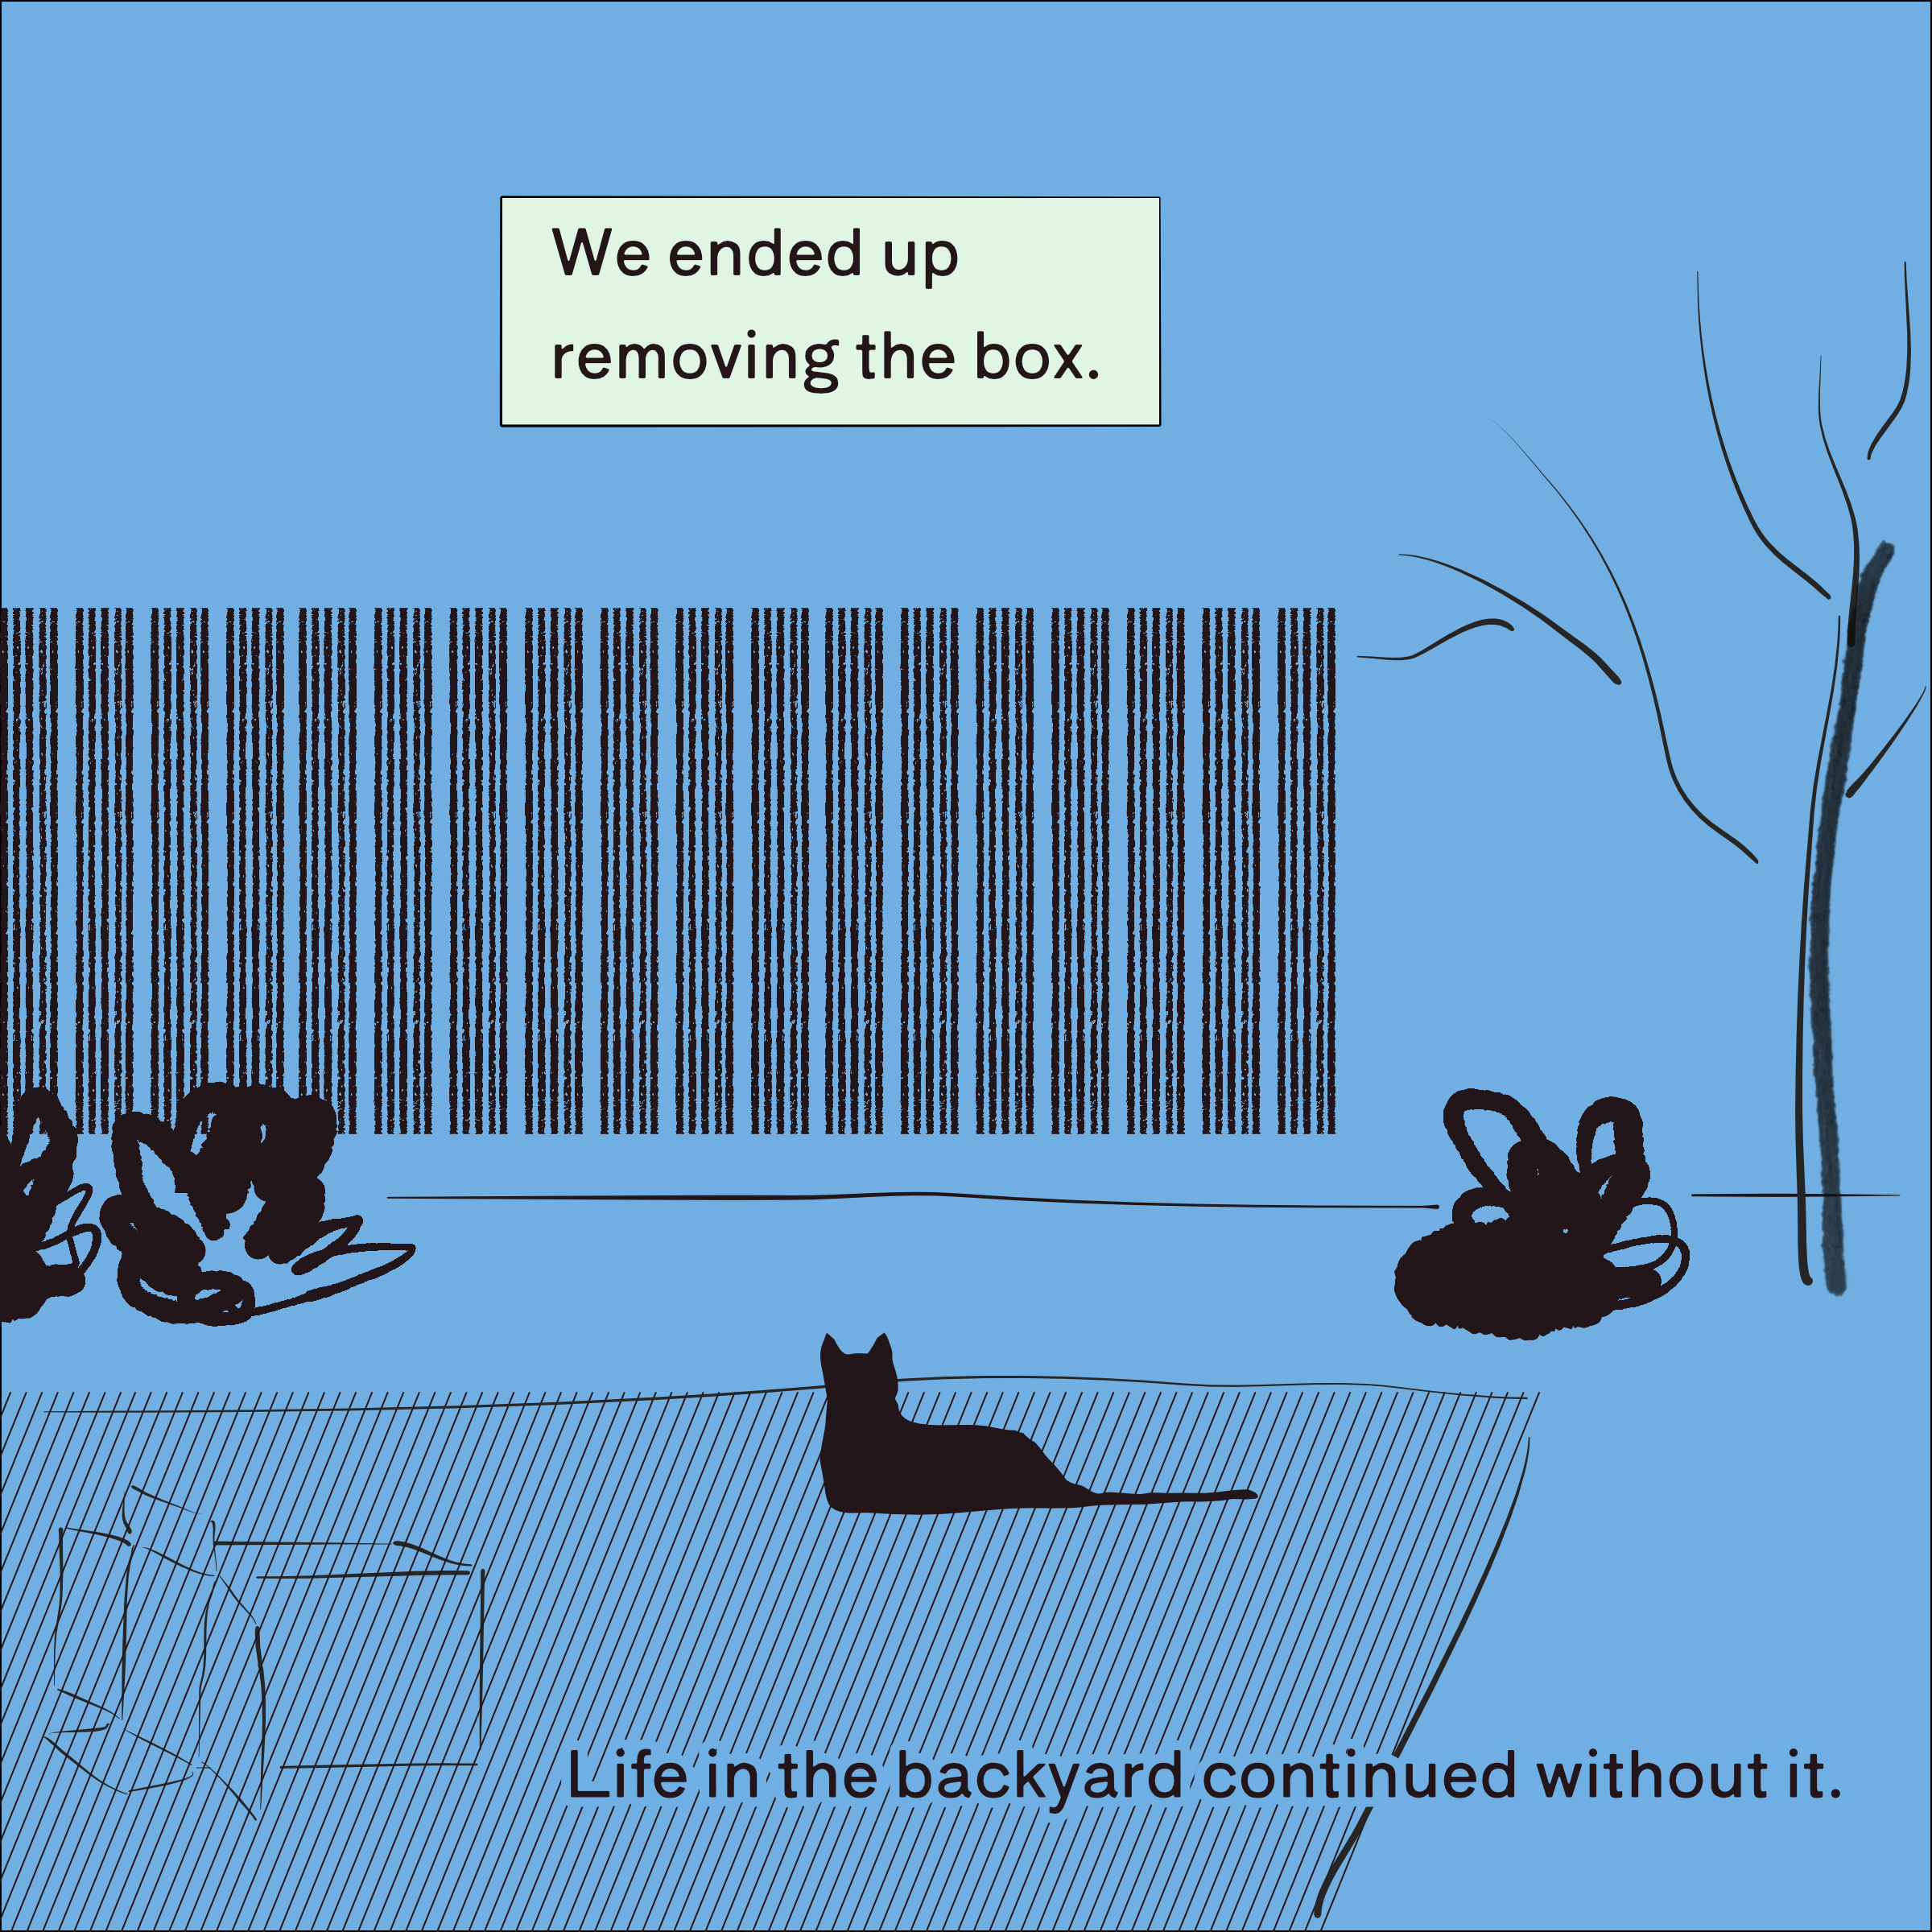 After a while, we ended up removing the box. Life in the backyard continued without it.